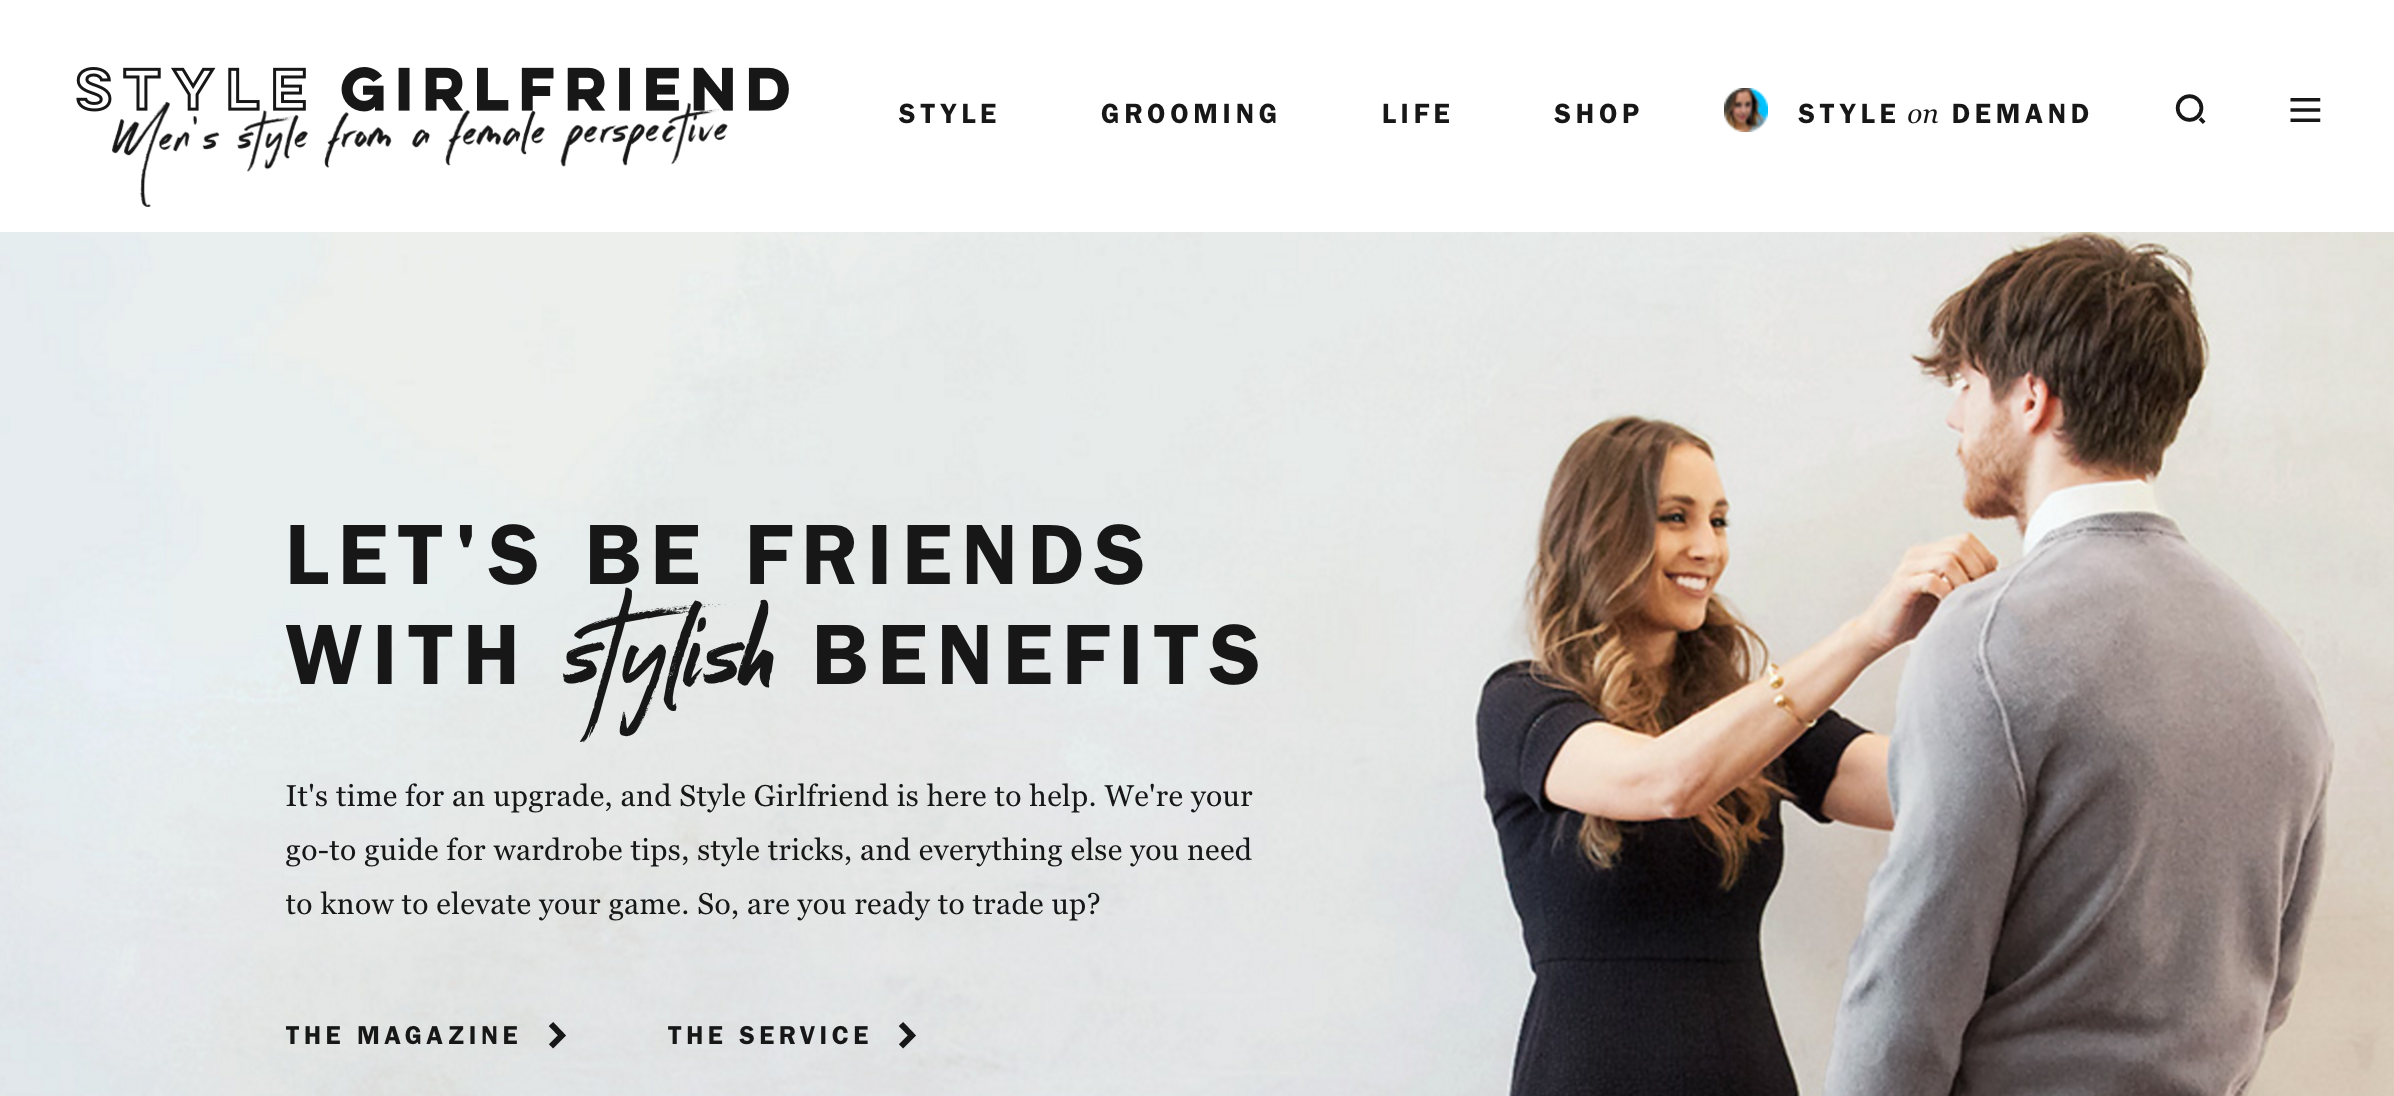 new style girlfriend site redesign